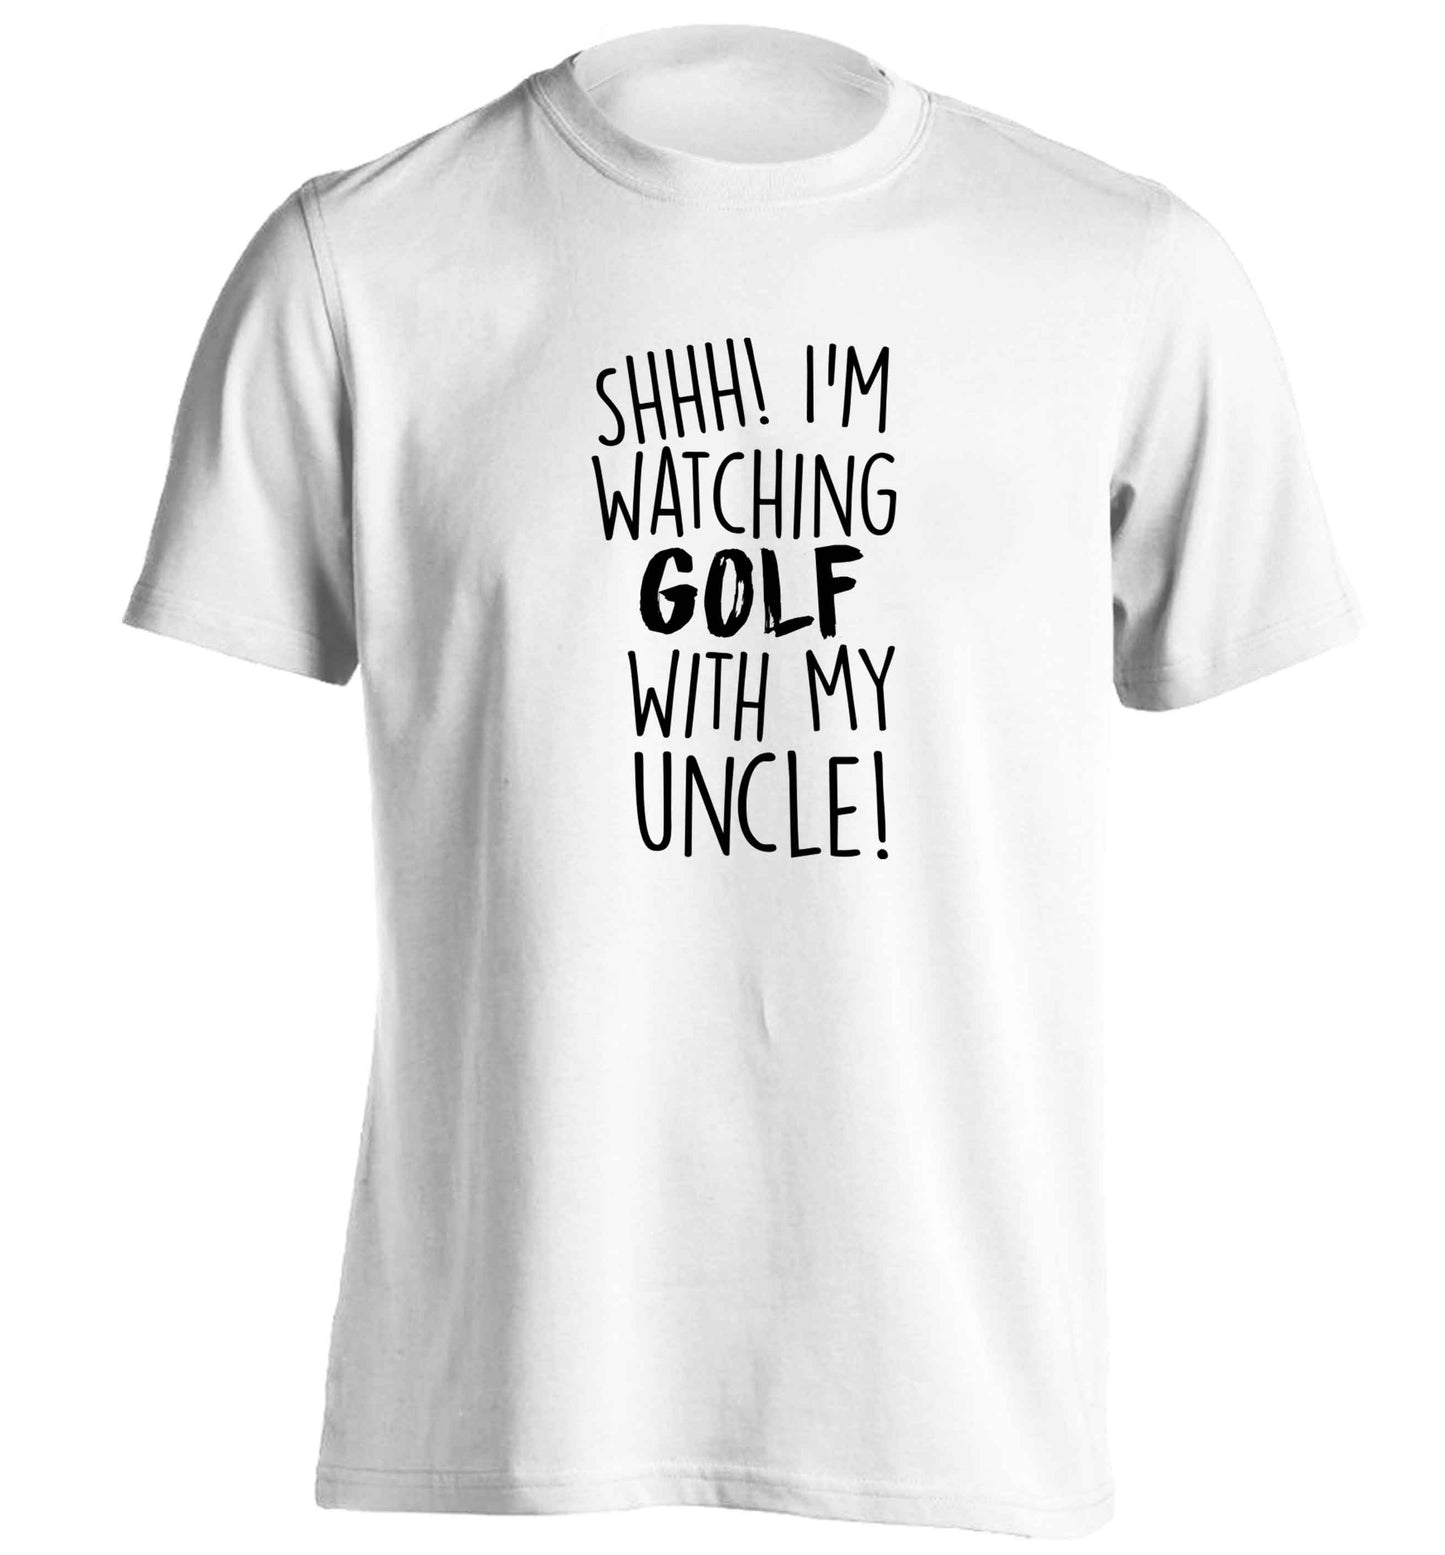 Shh I'm watching golf with my uncle adults unisex white Tshirt 2XL